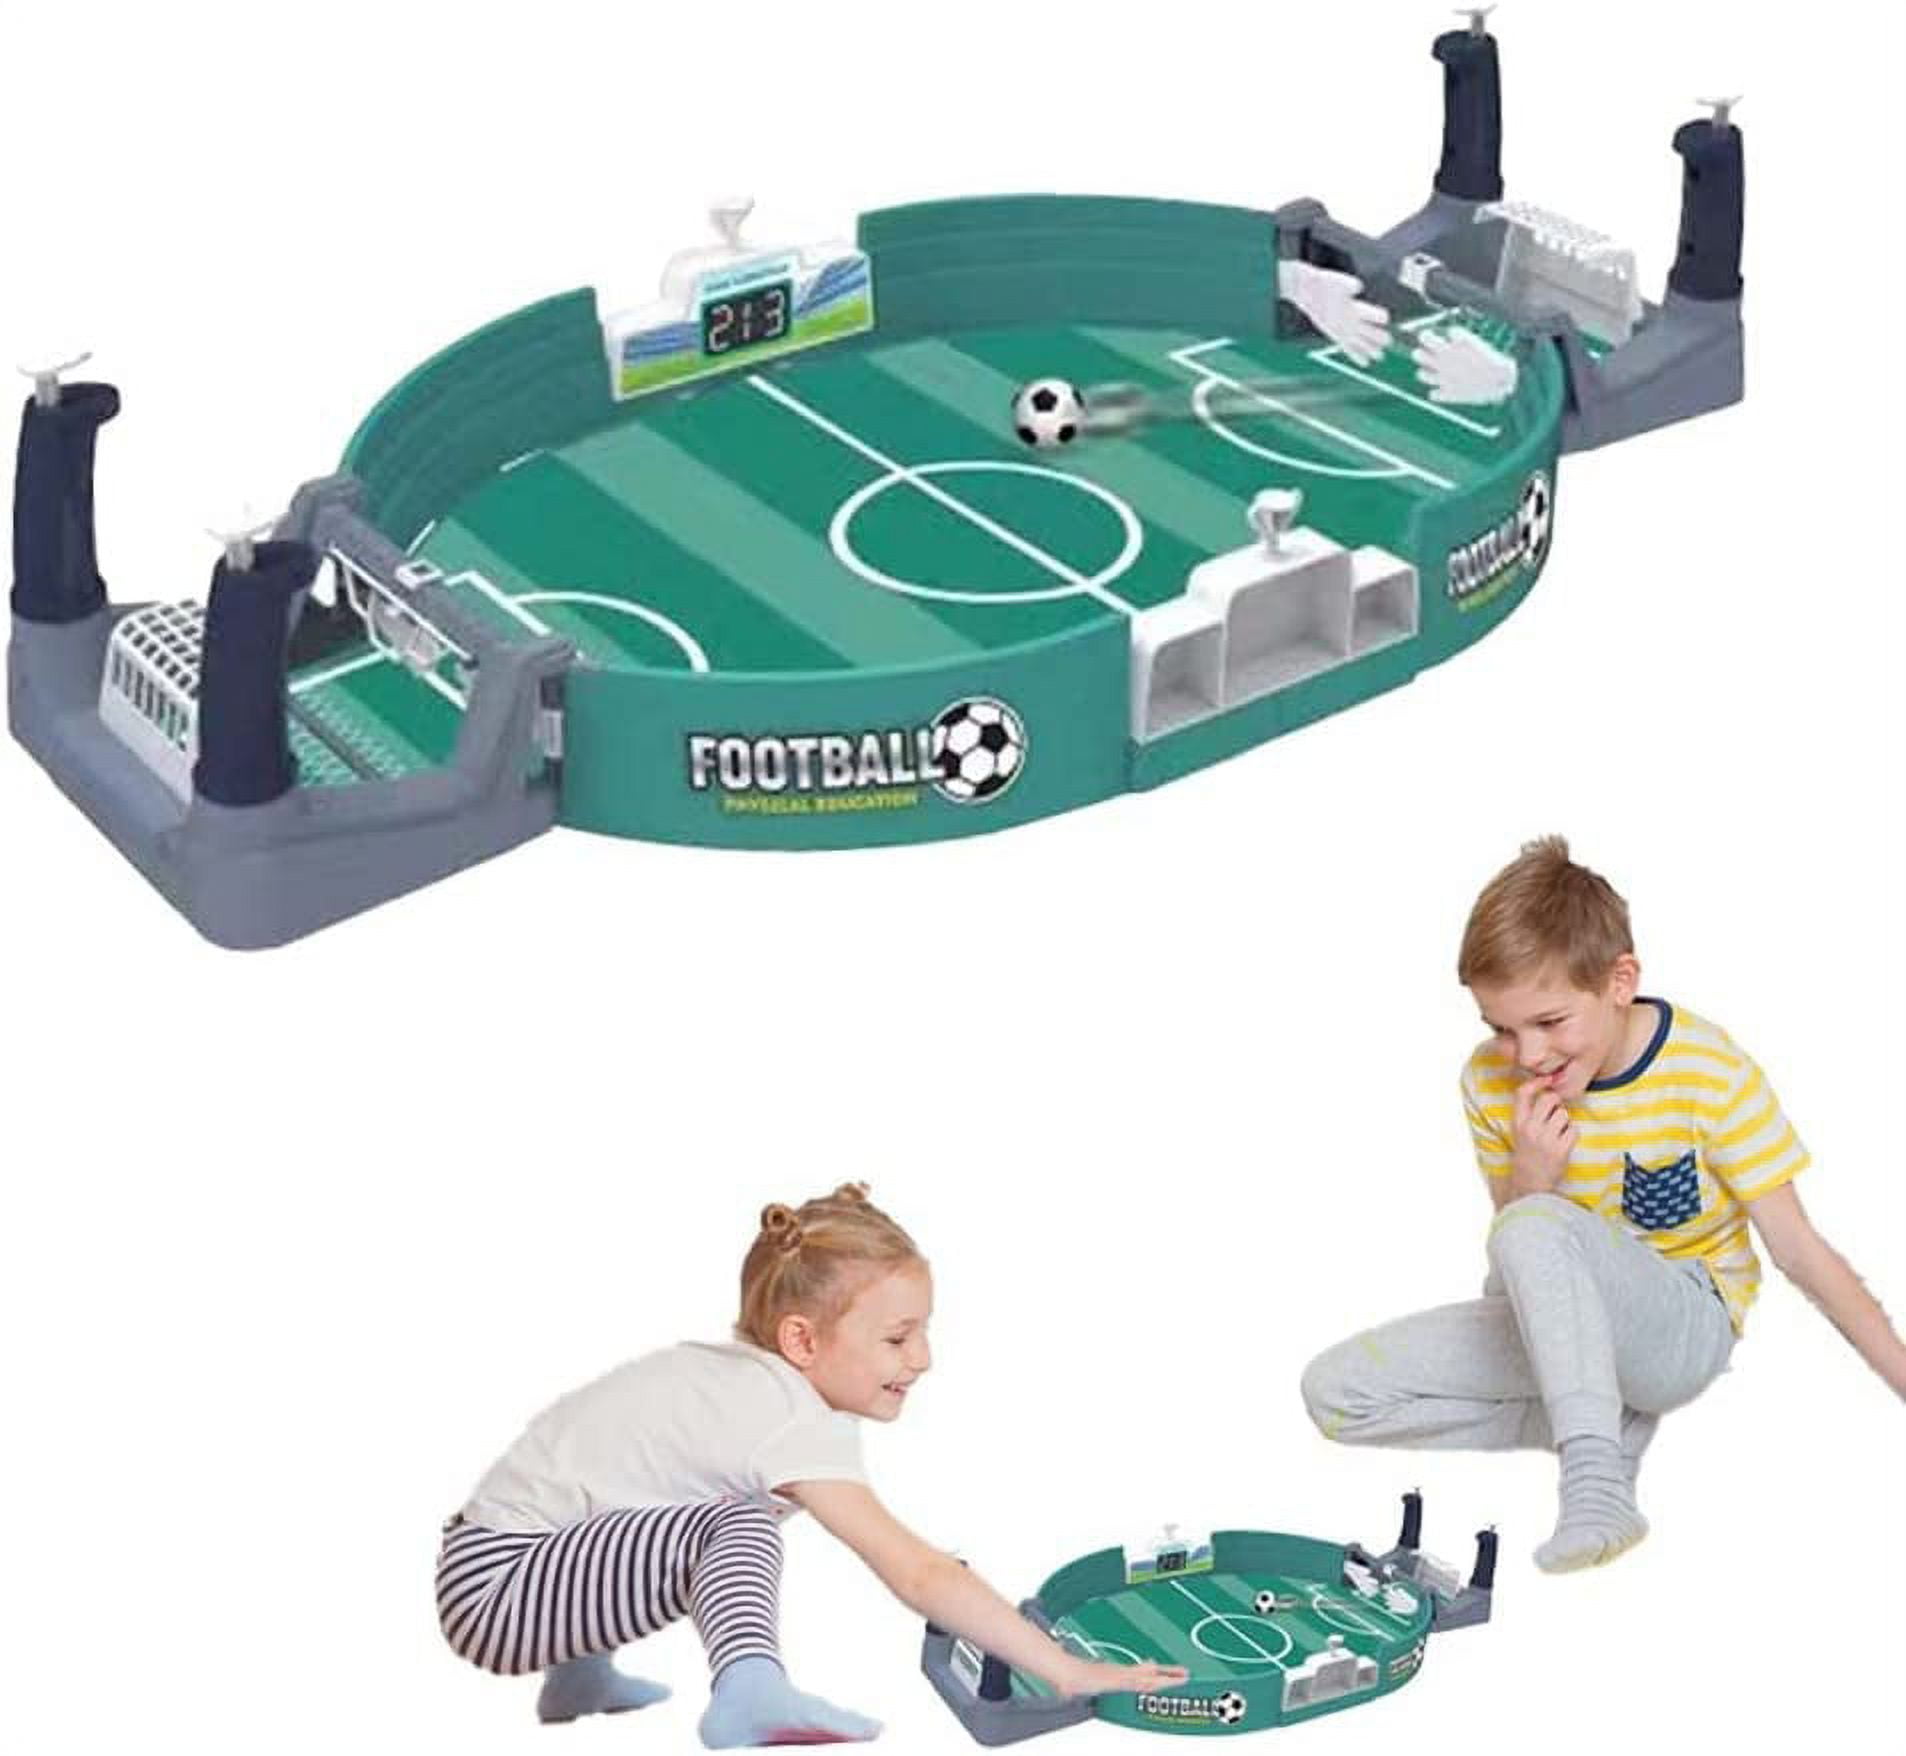 Children's Table Football Two-player Battle Table Games Football